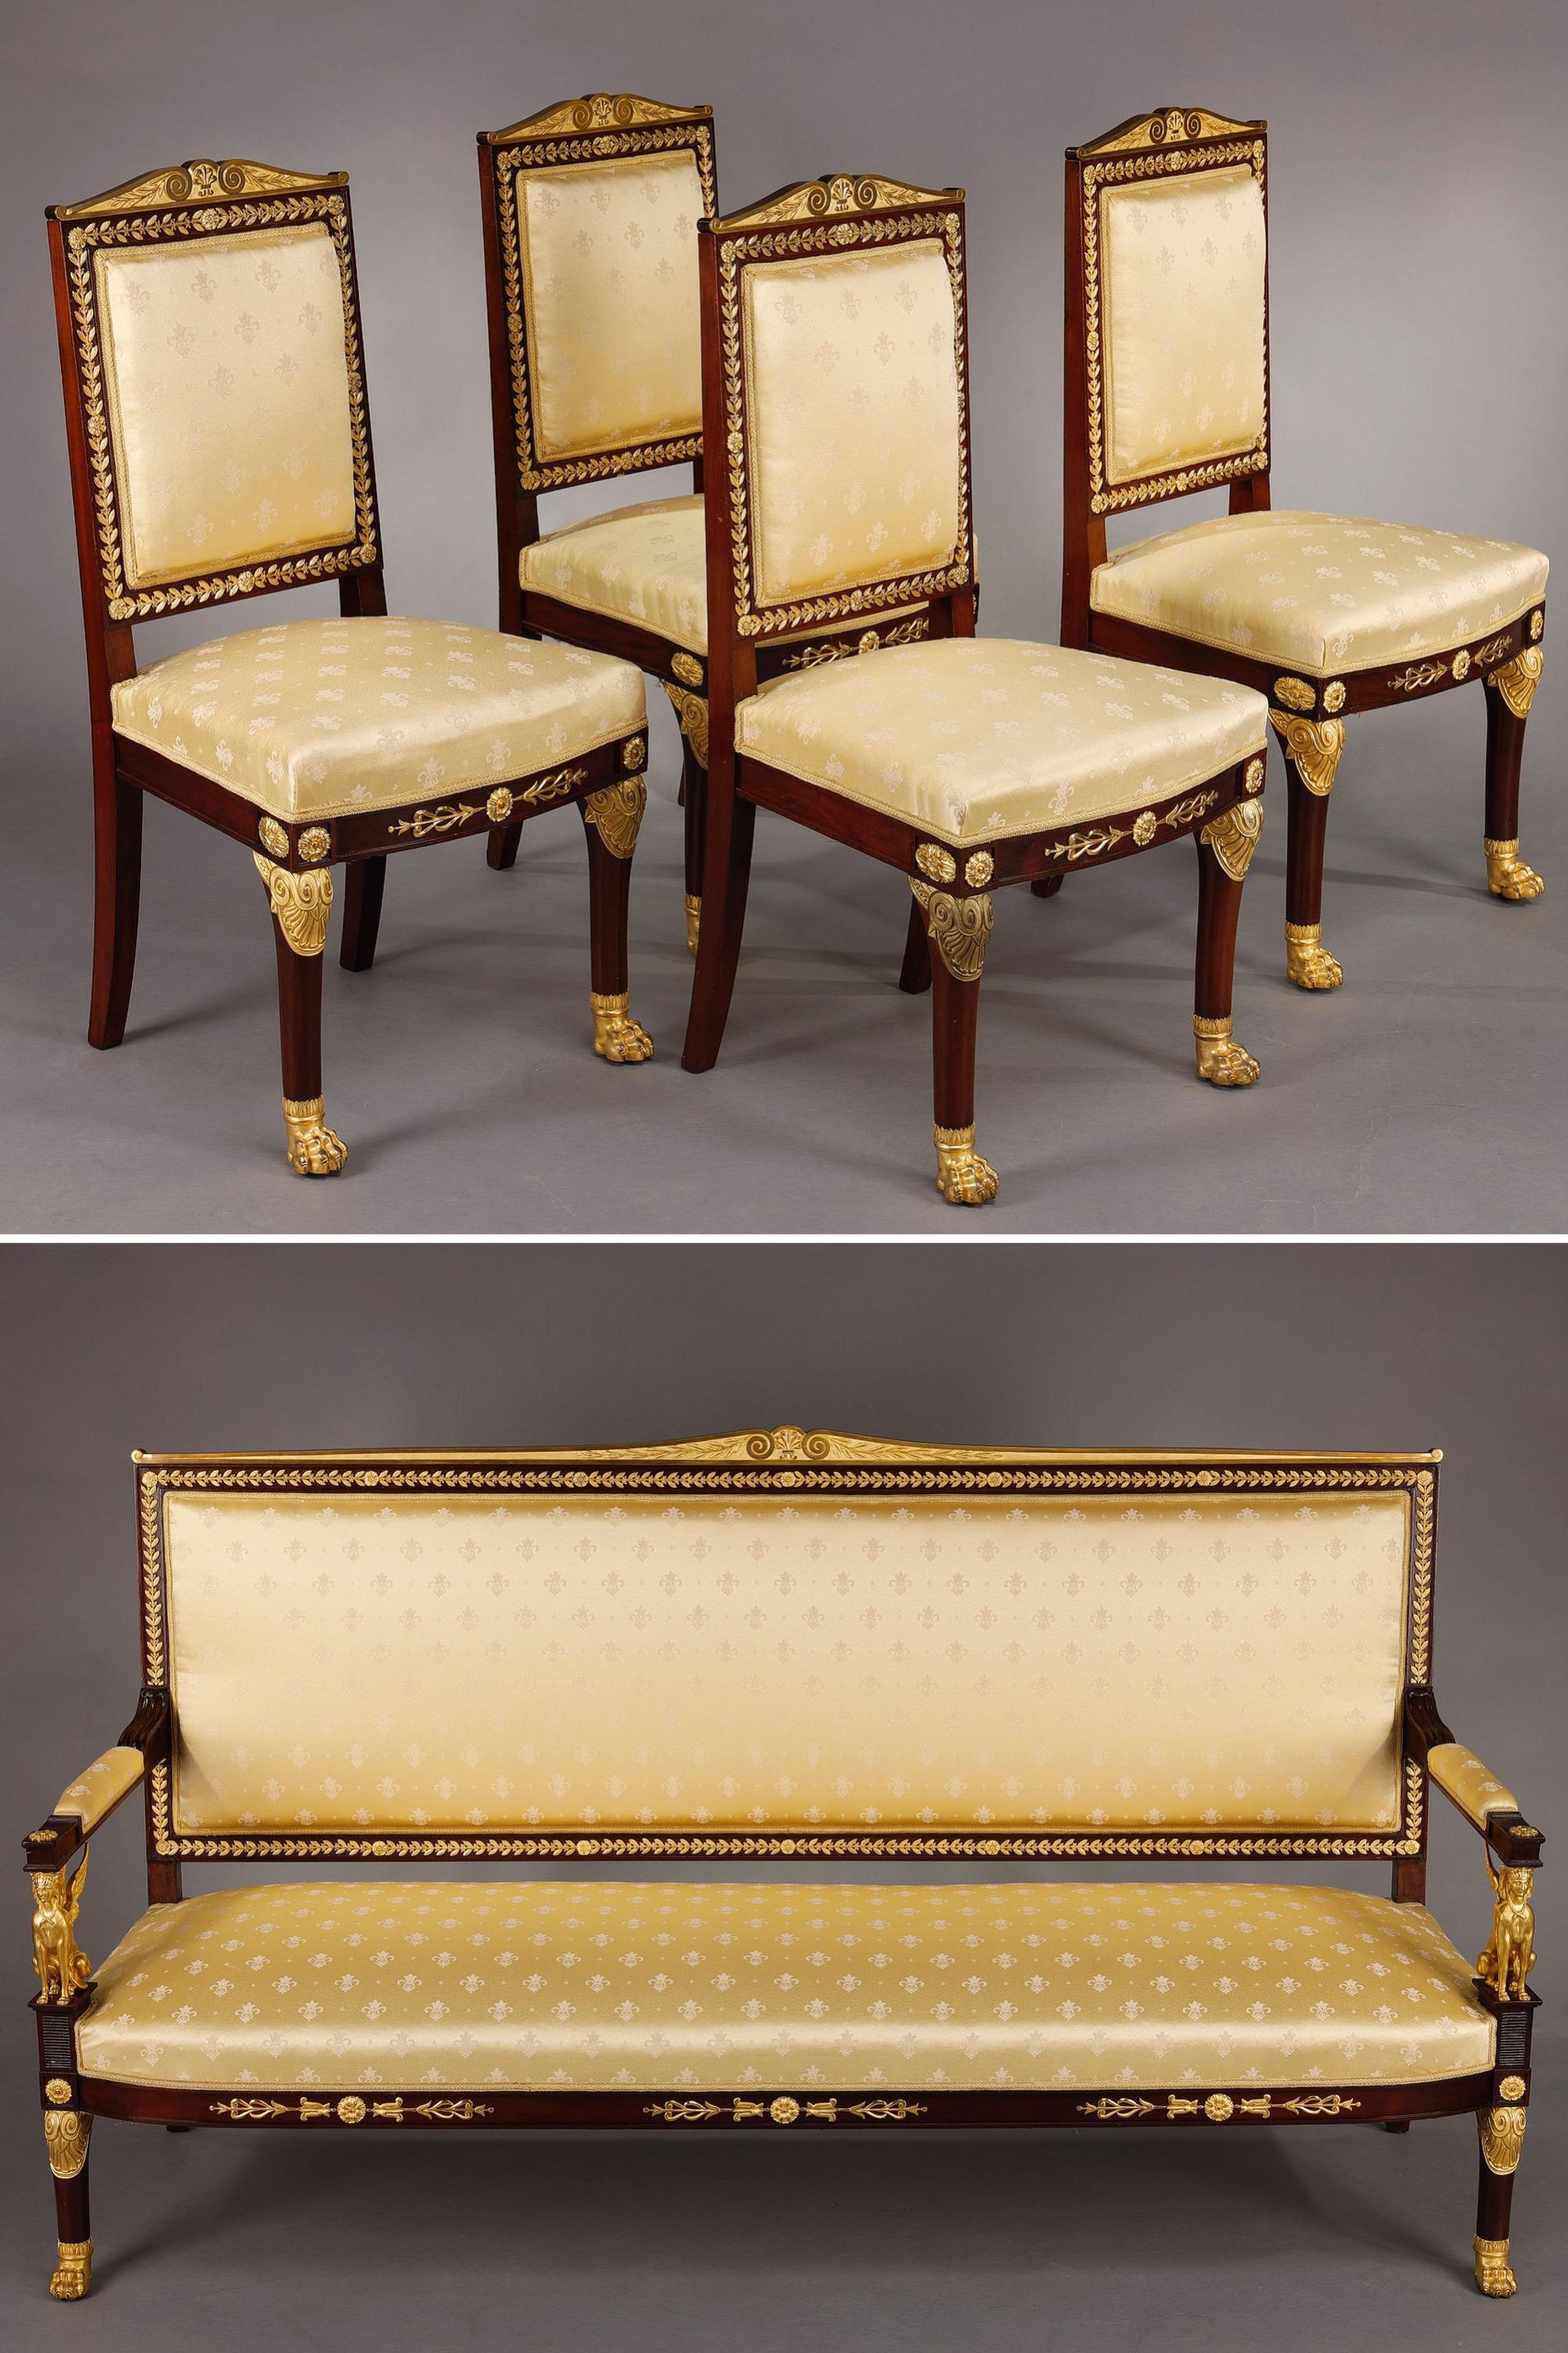 French Empire-style Salon in Mahogany and gilded bronzes For Sale